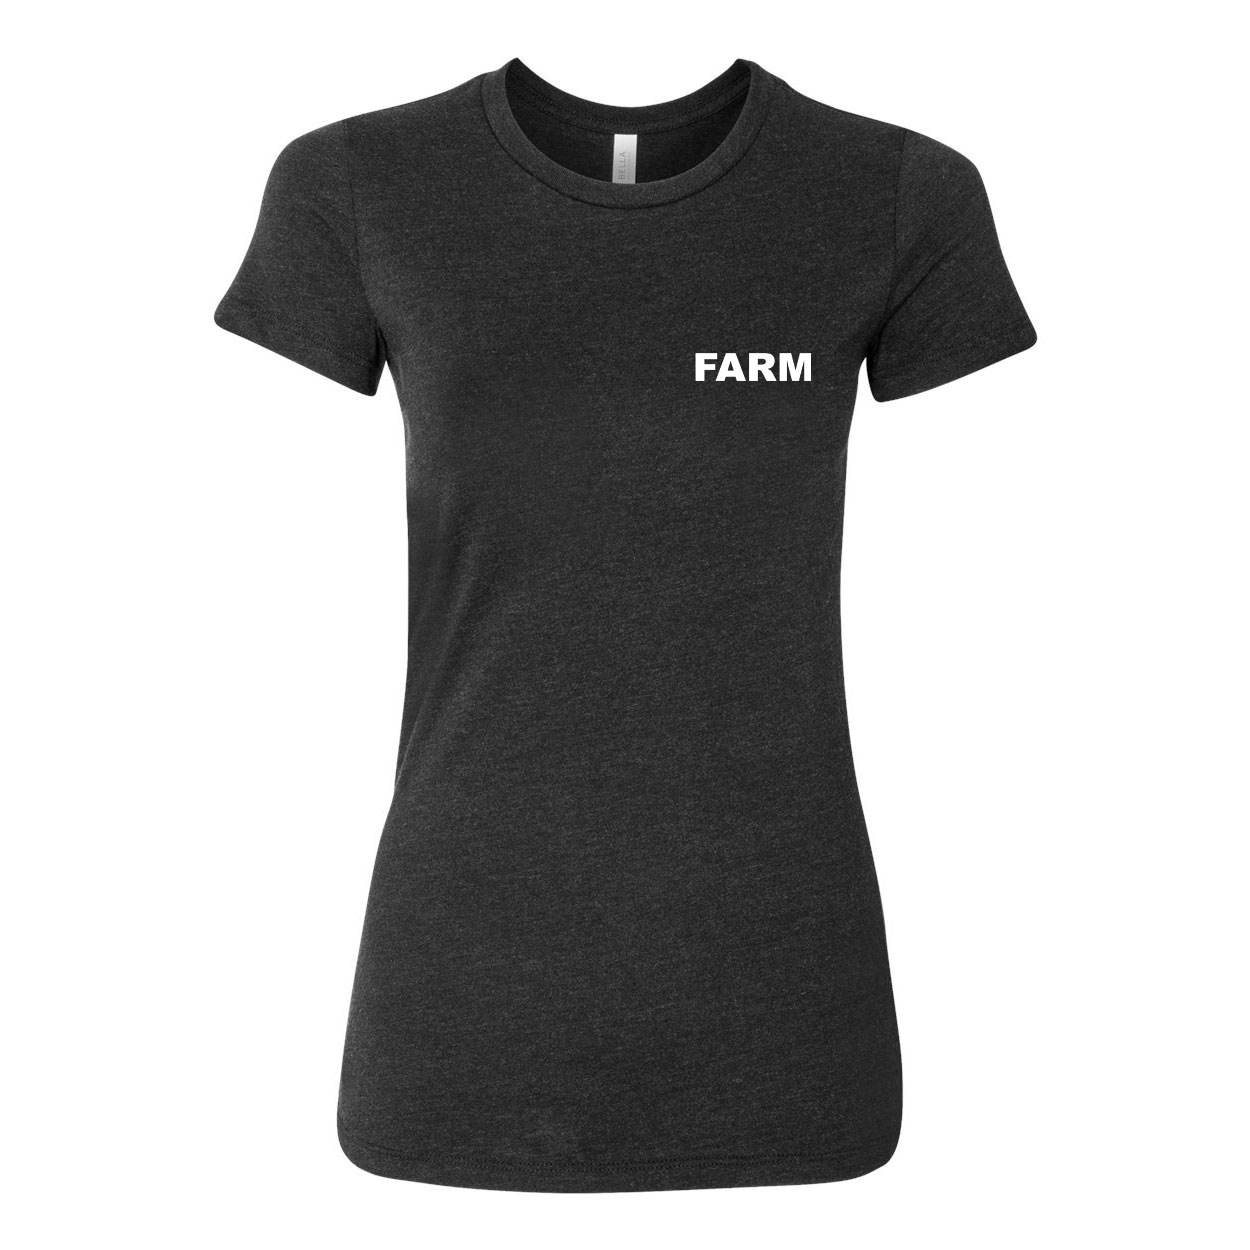 Farm Brand Logo Night Out Womens Fitted T-Shirt Dark Heather Gray